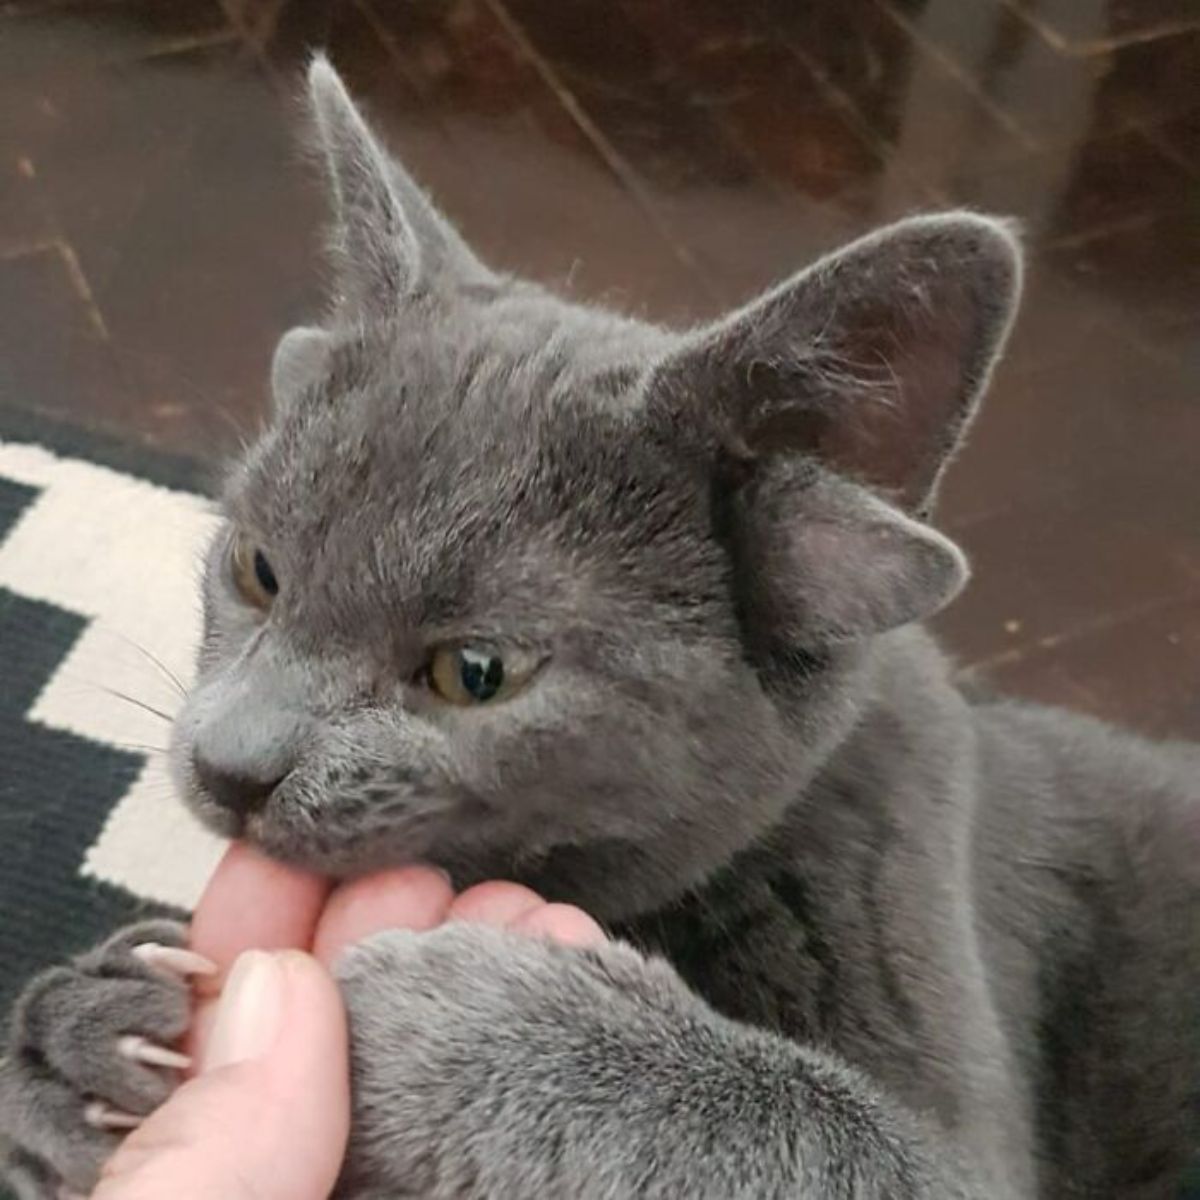 grey kitten with four ears holding someone's hand and biting it while the claws of one paw is out